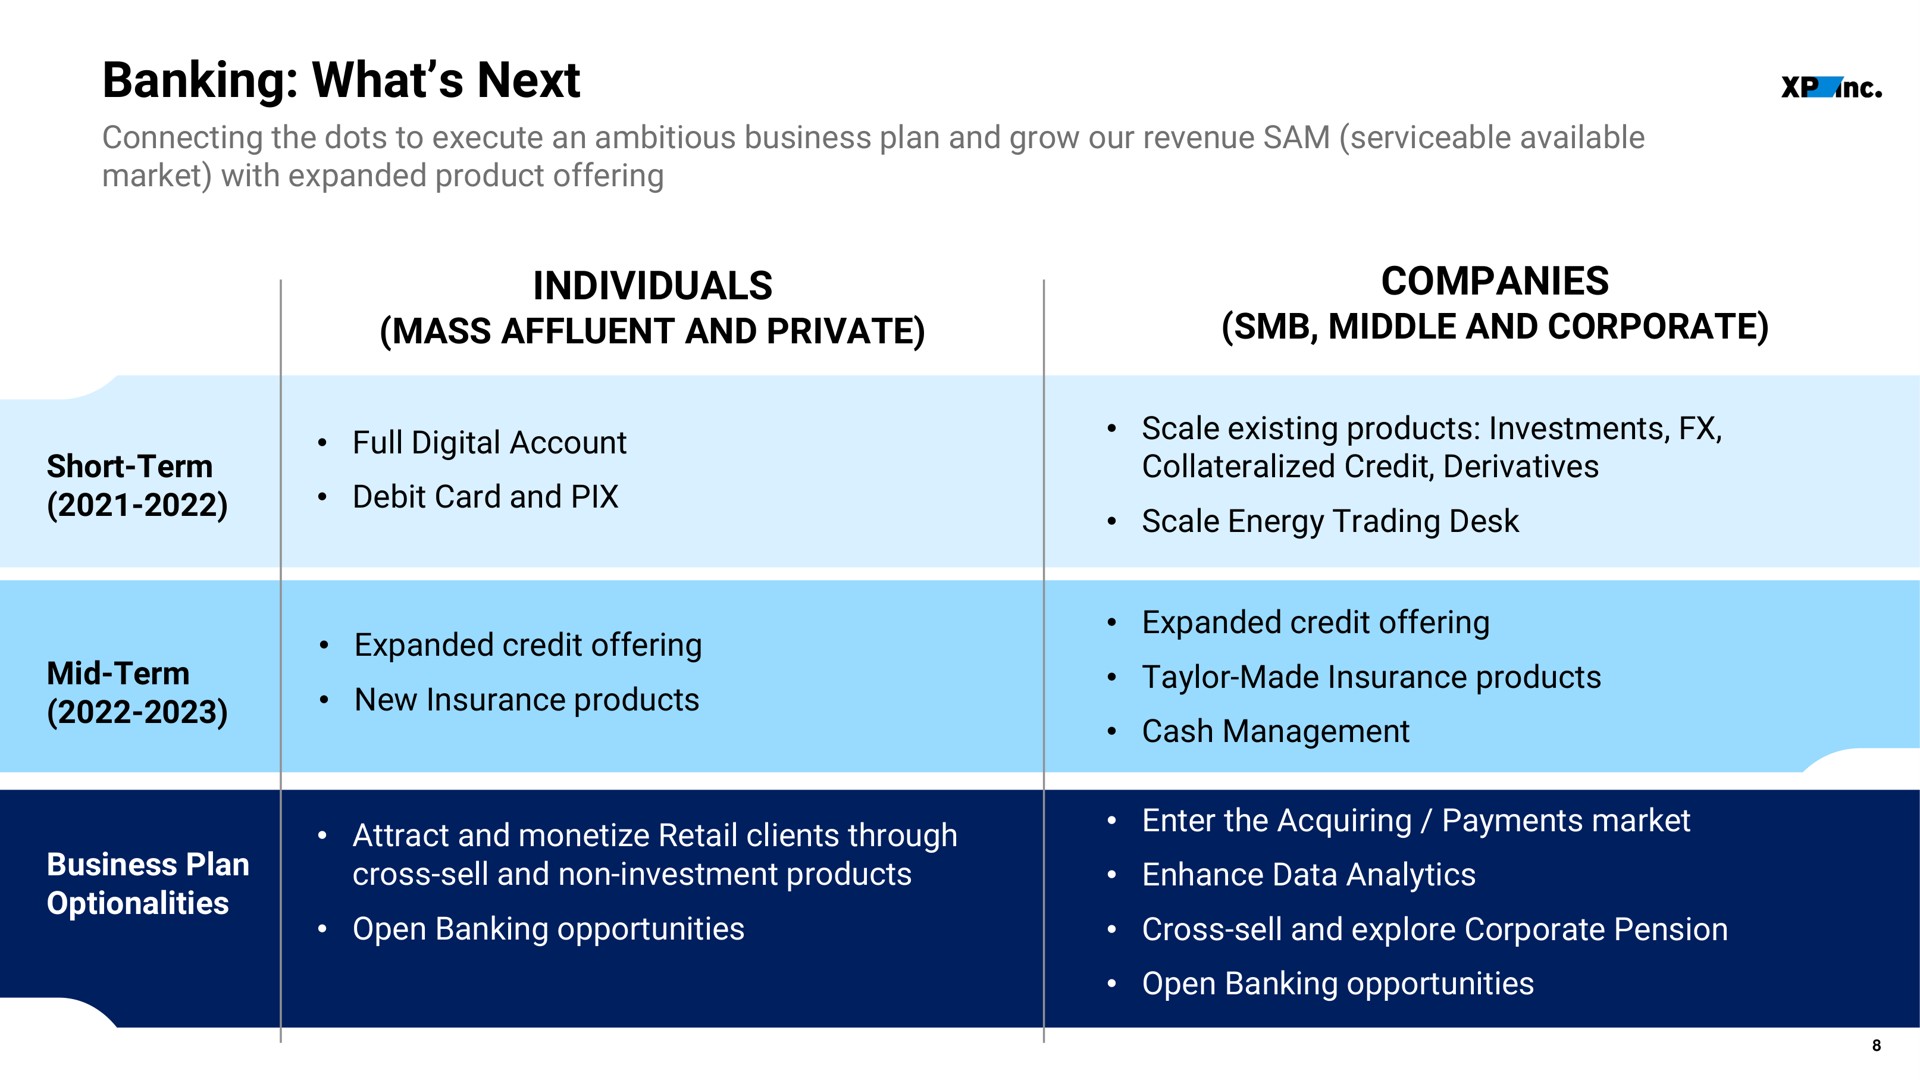 banking what next individuals mass affluent and private companies middle and corporate | XP Inc